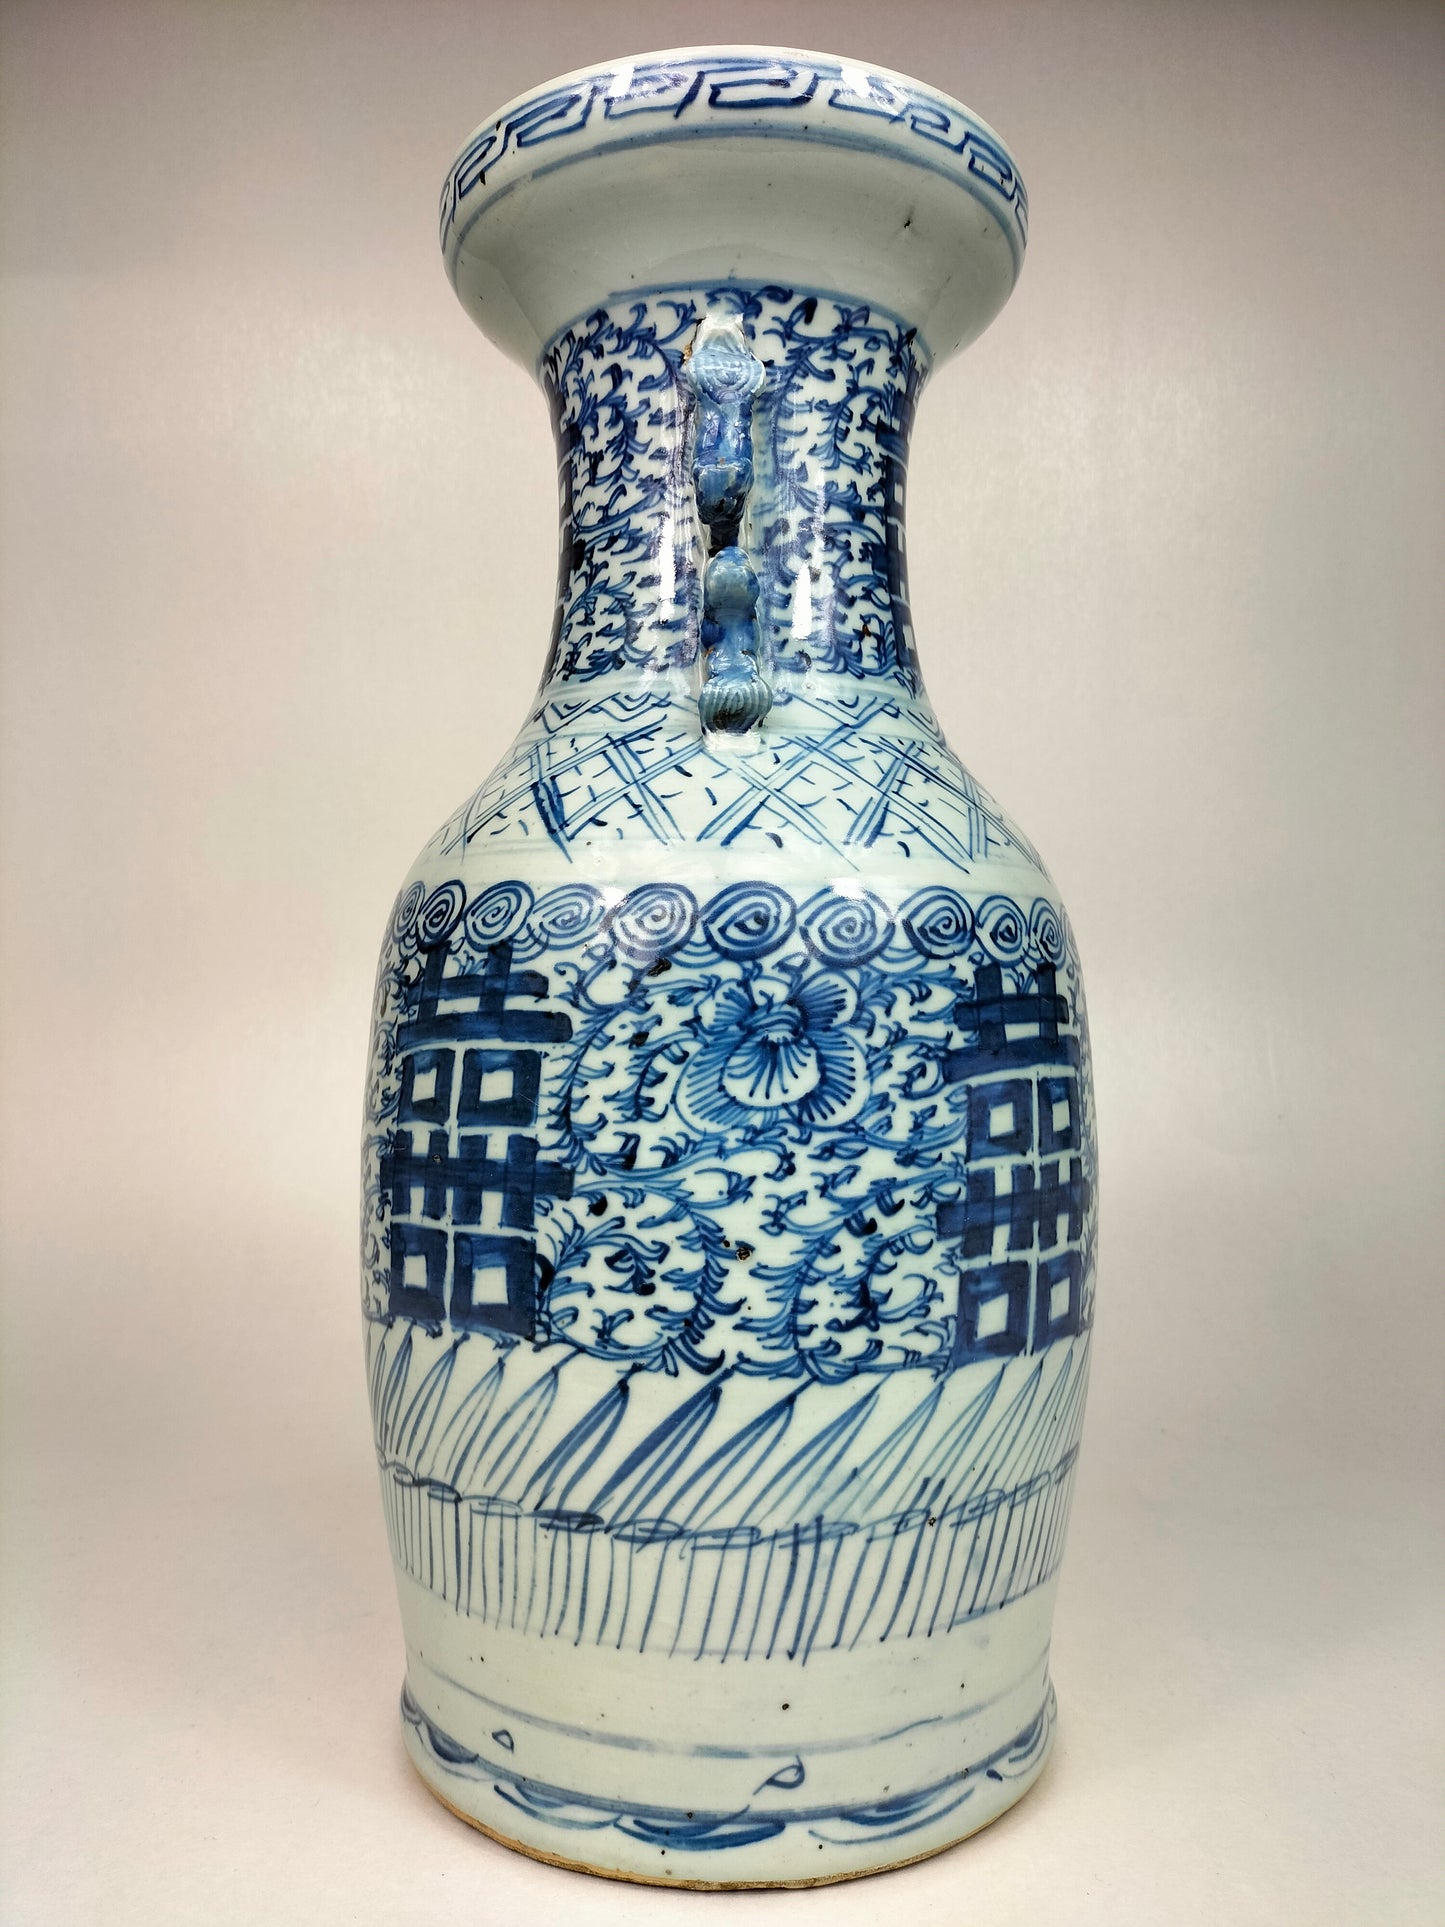 Antique Chinese double happiness vase // Blue white - Qing Dynasty - 19th century